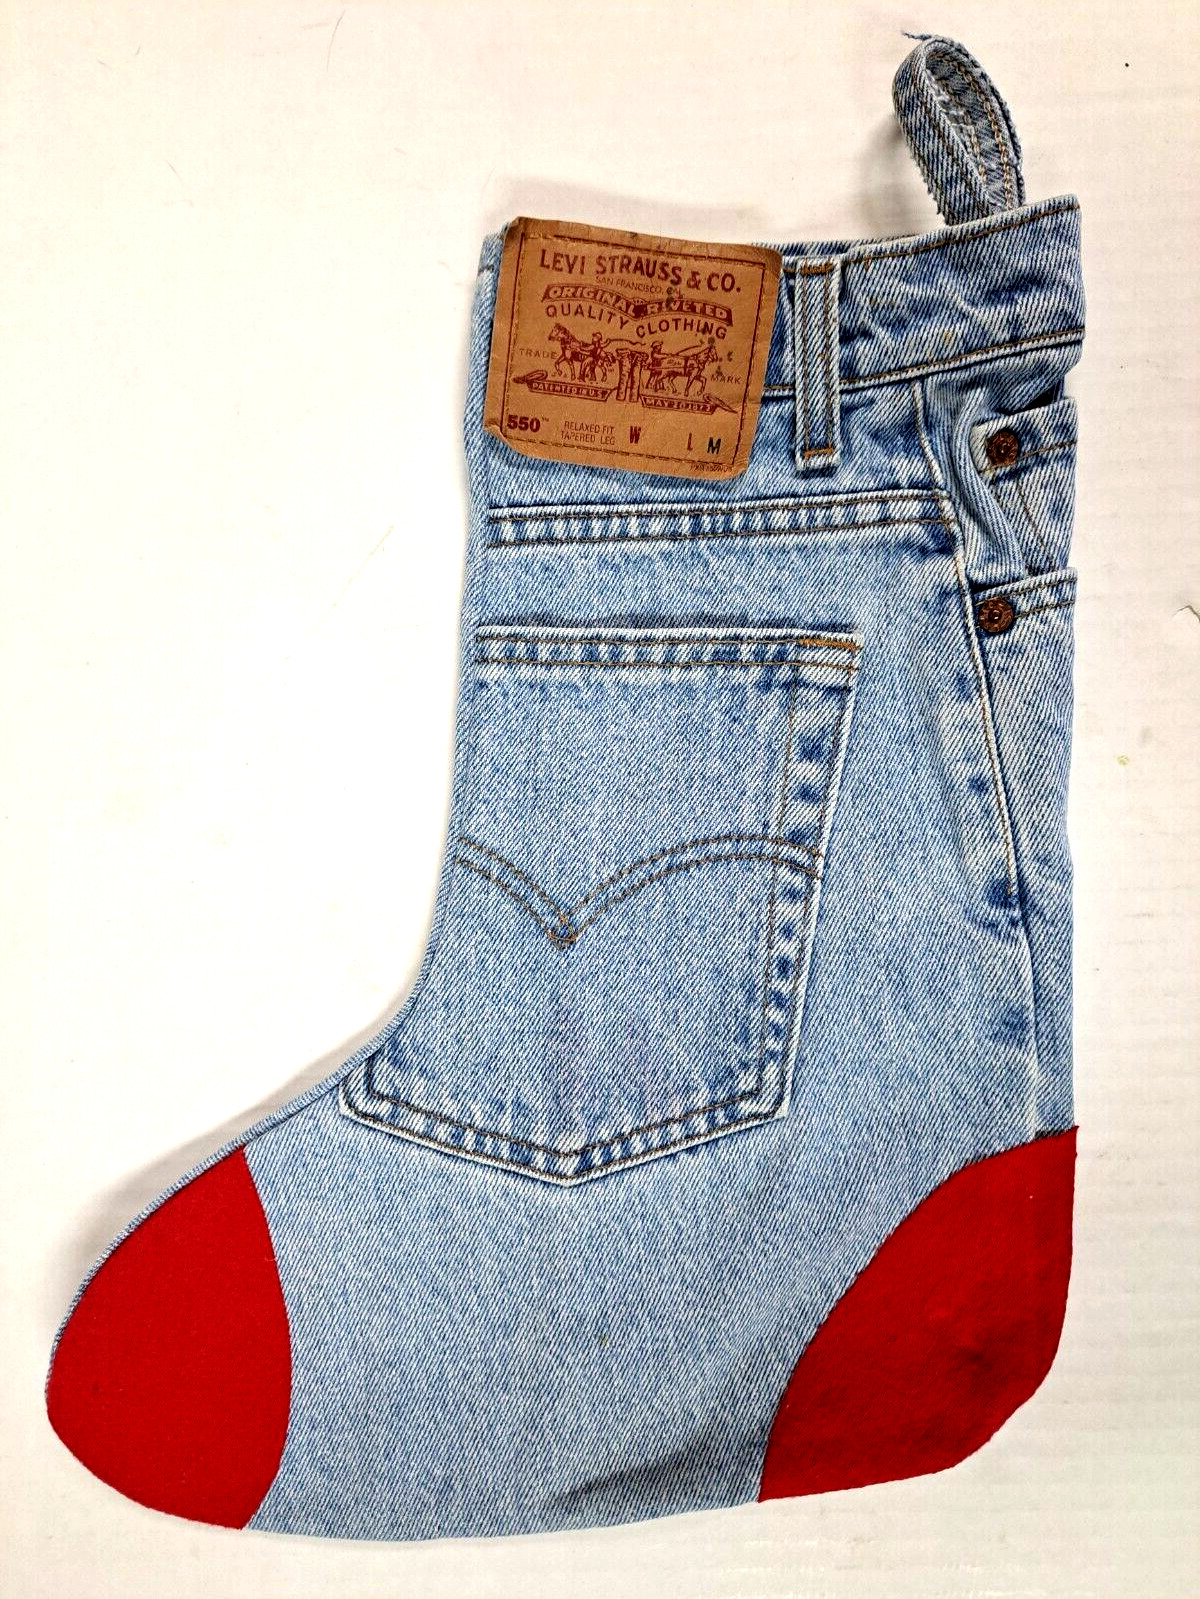 Handmade Levi Jeans denim Christmas stocking hand crafted from old jeans